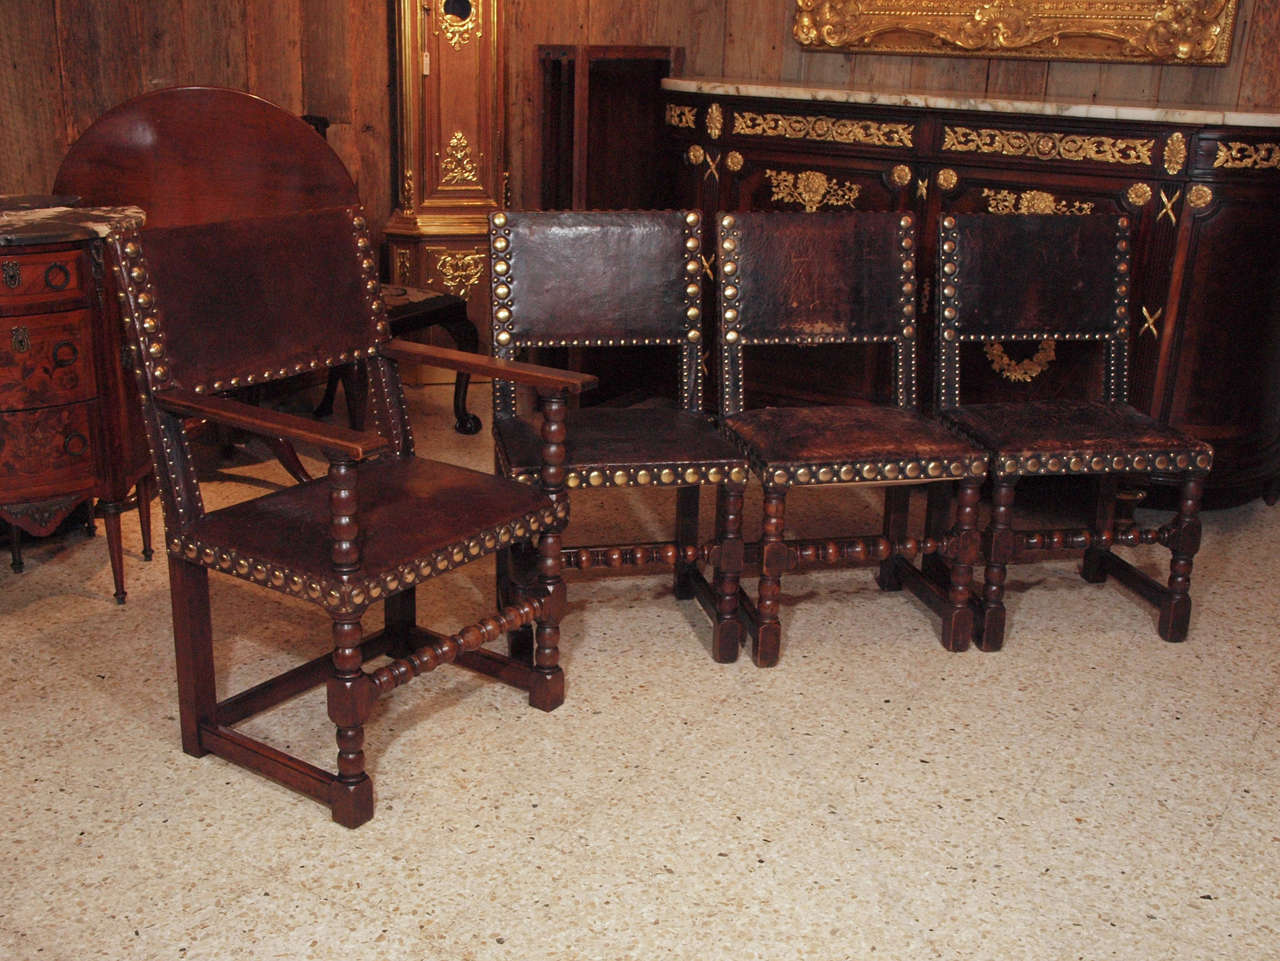 Set of 8 Antique English Oak and Leather Chairs with Brass Fittings.
Arms measure 35 3/4